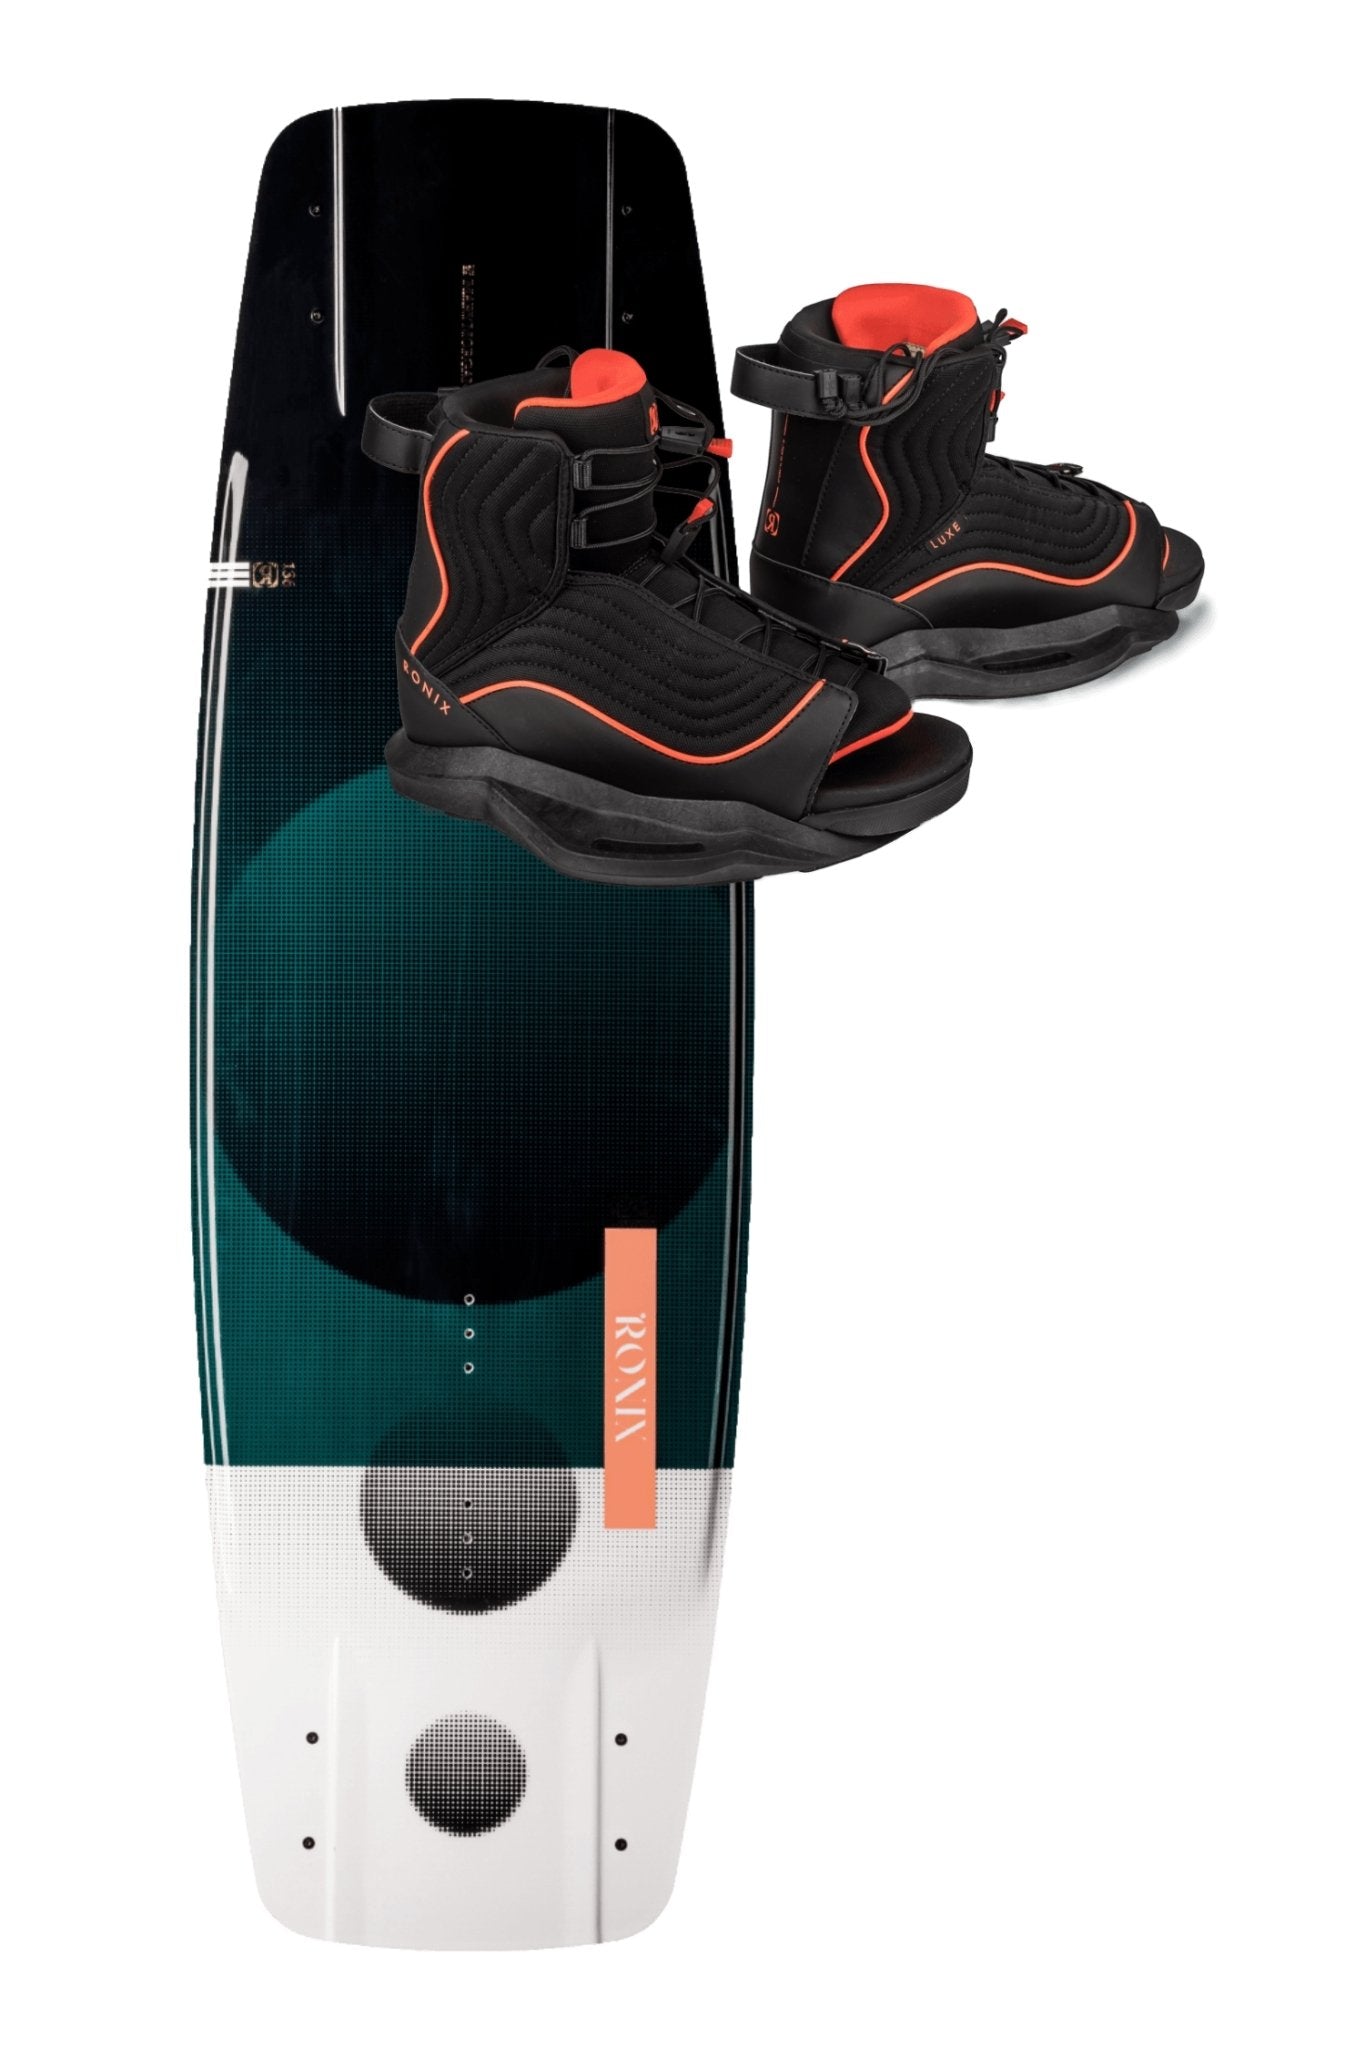 2023 Rise Wakeboard -Ronix232100-132-Luxe-W 6 to 8.5